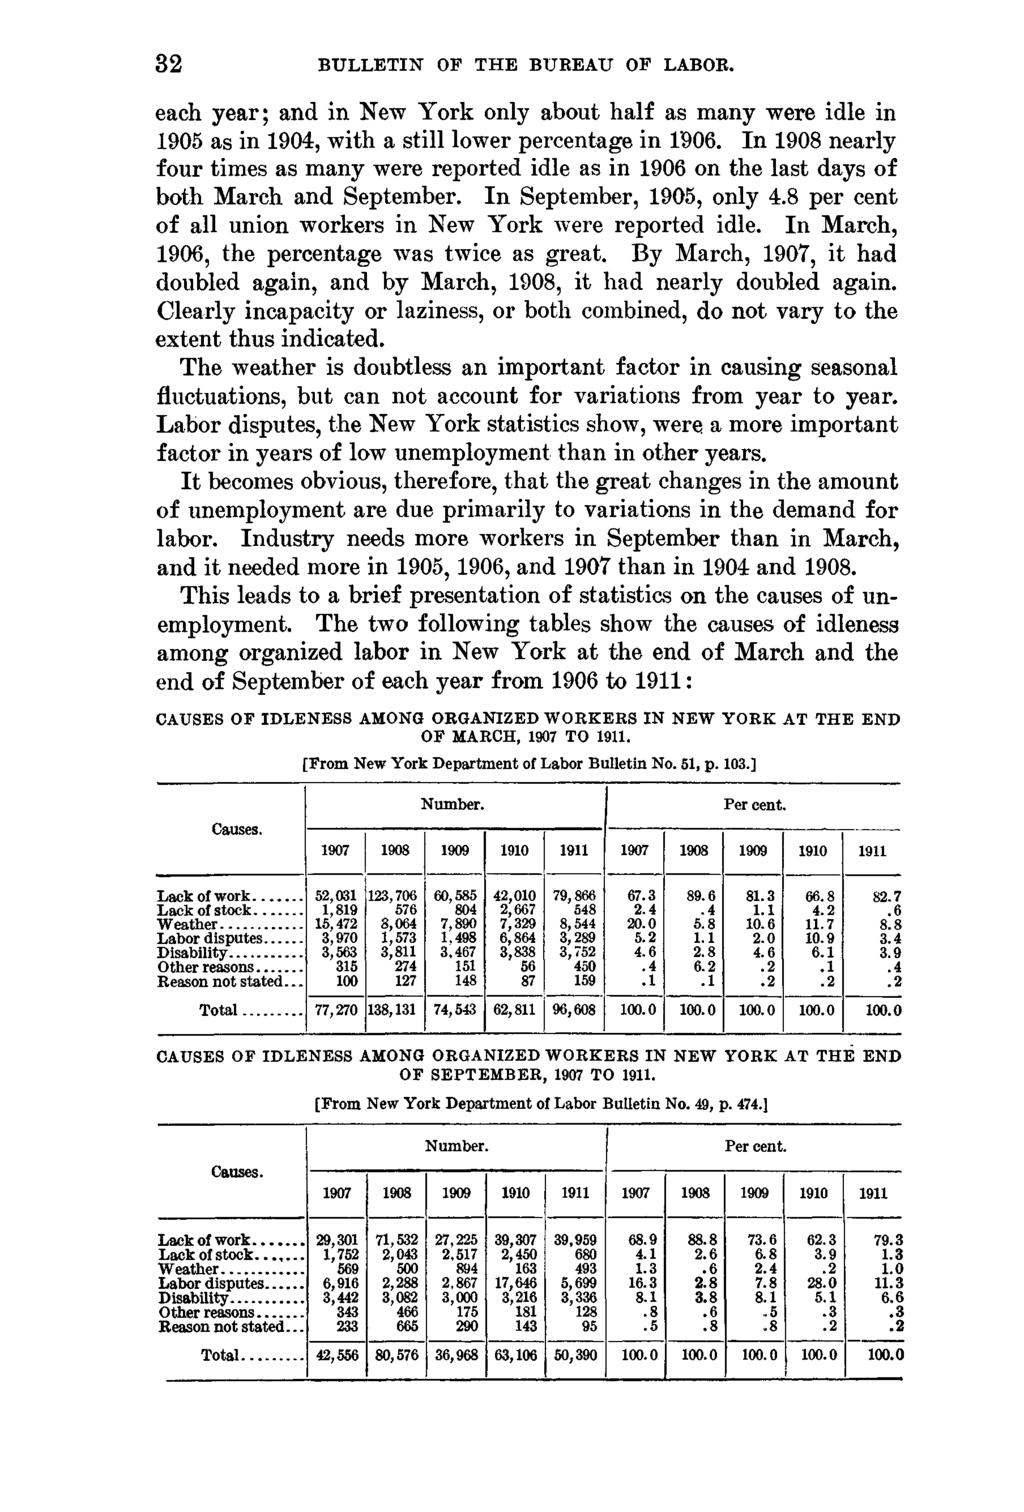 32 BULLETIN OF THE BUREAU OF LABOR. each year; and in New York only about half as many were idle in 1905 as in 1904, with a still lower percentage in 1'906.